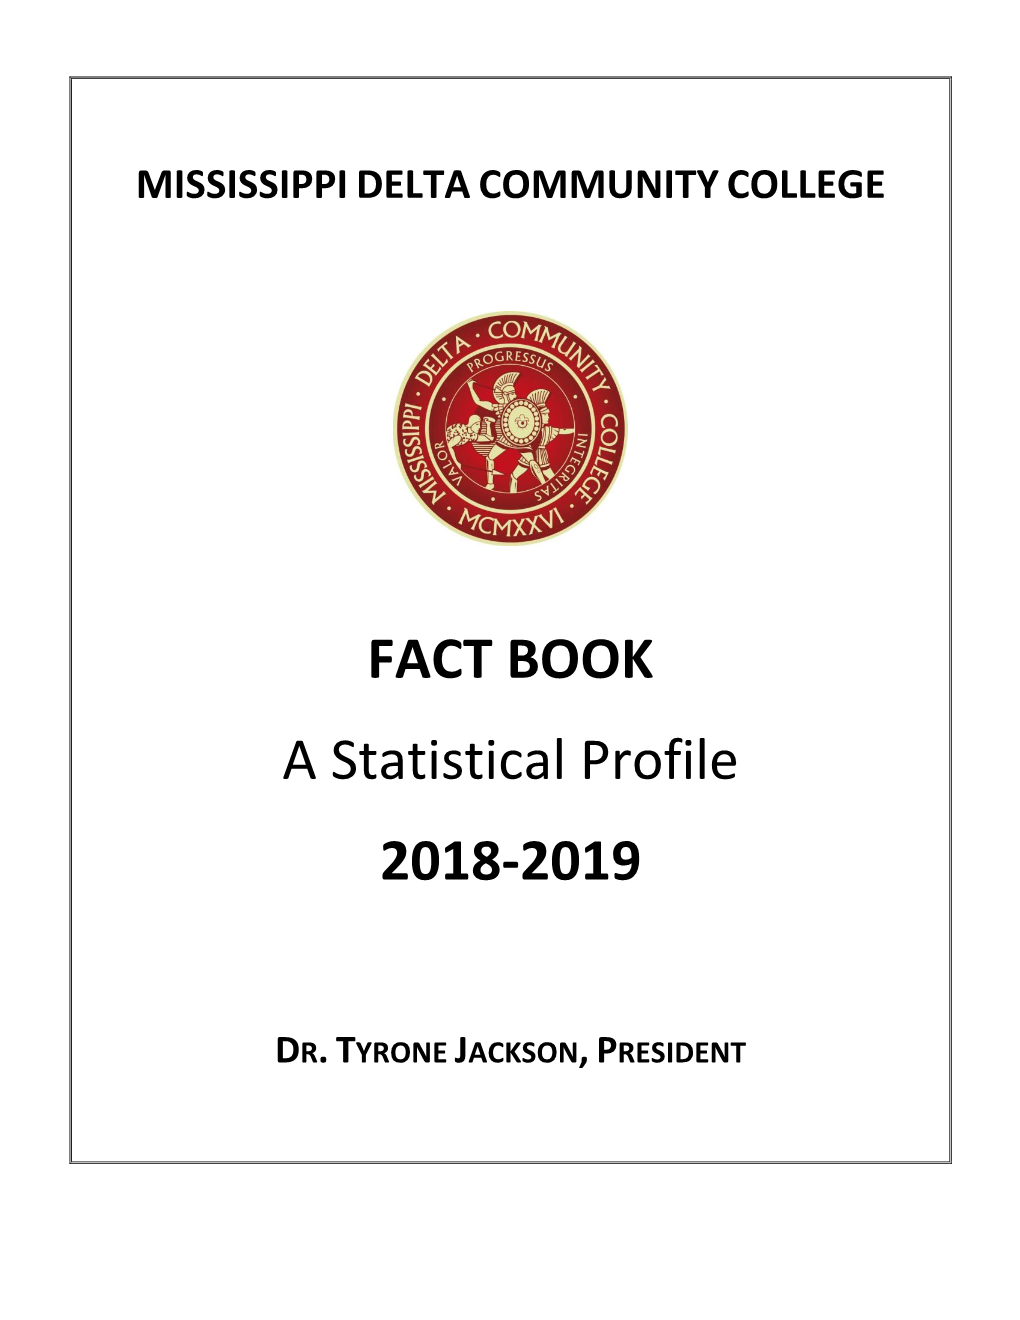 MDCC FACT BOOK 2018-19 | Introduction